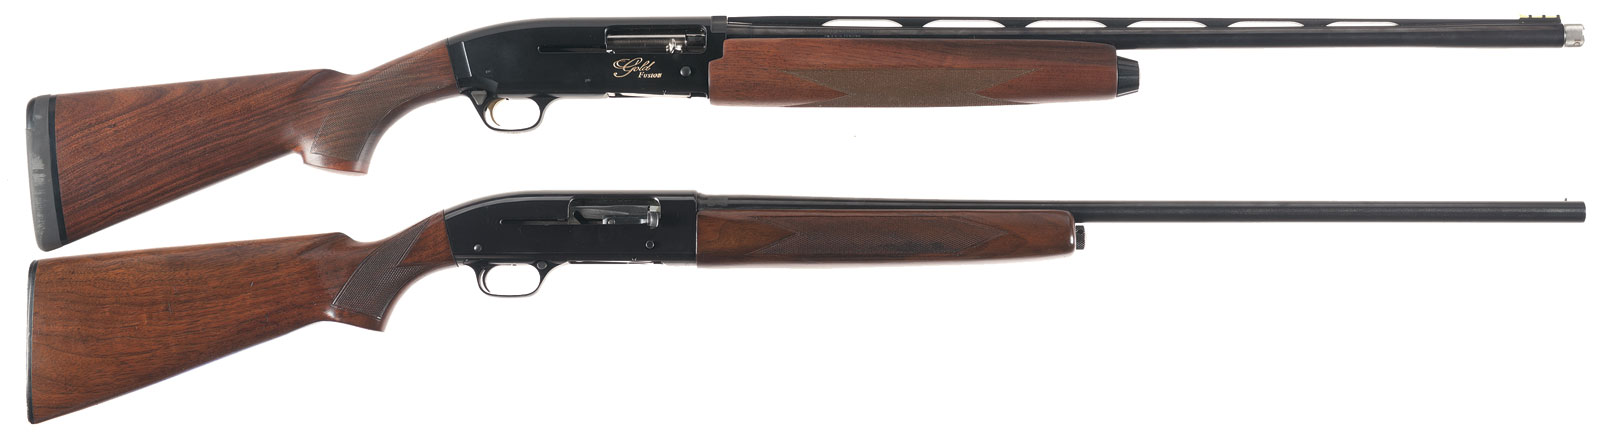 Related Pictures Browning Auto A5 Gauge Semi Automatic Shotgun